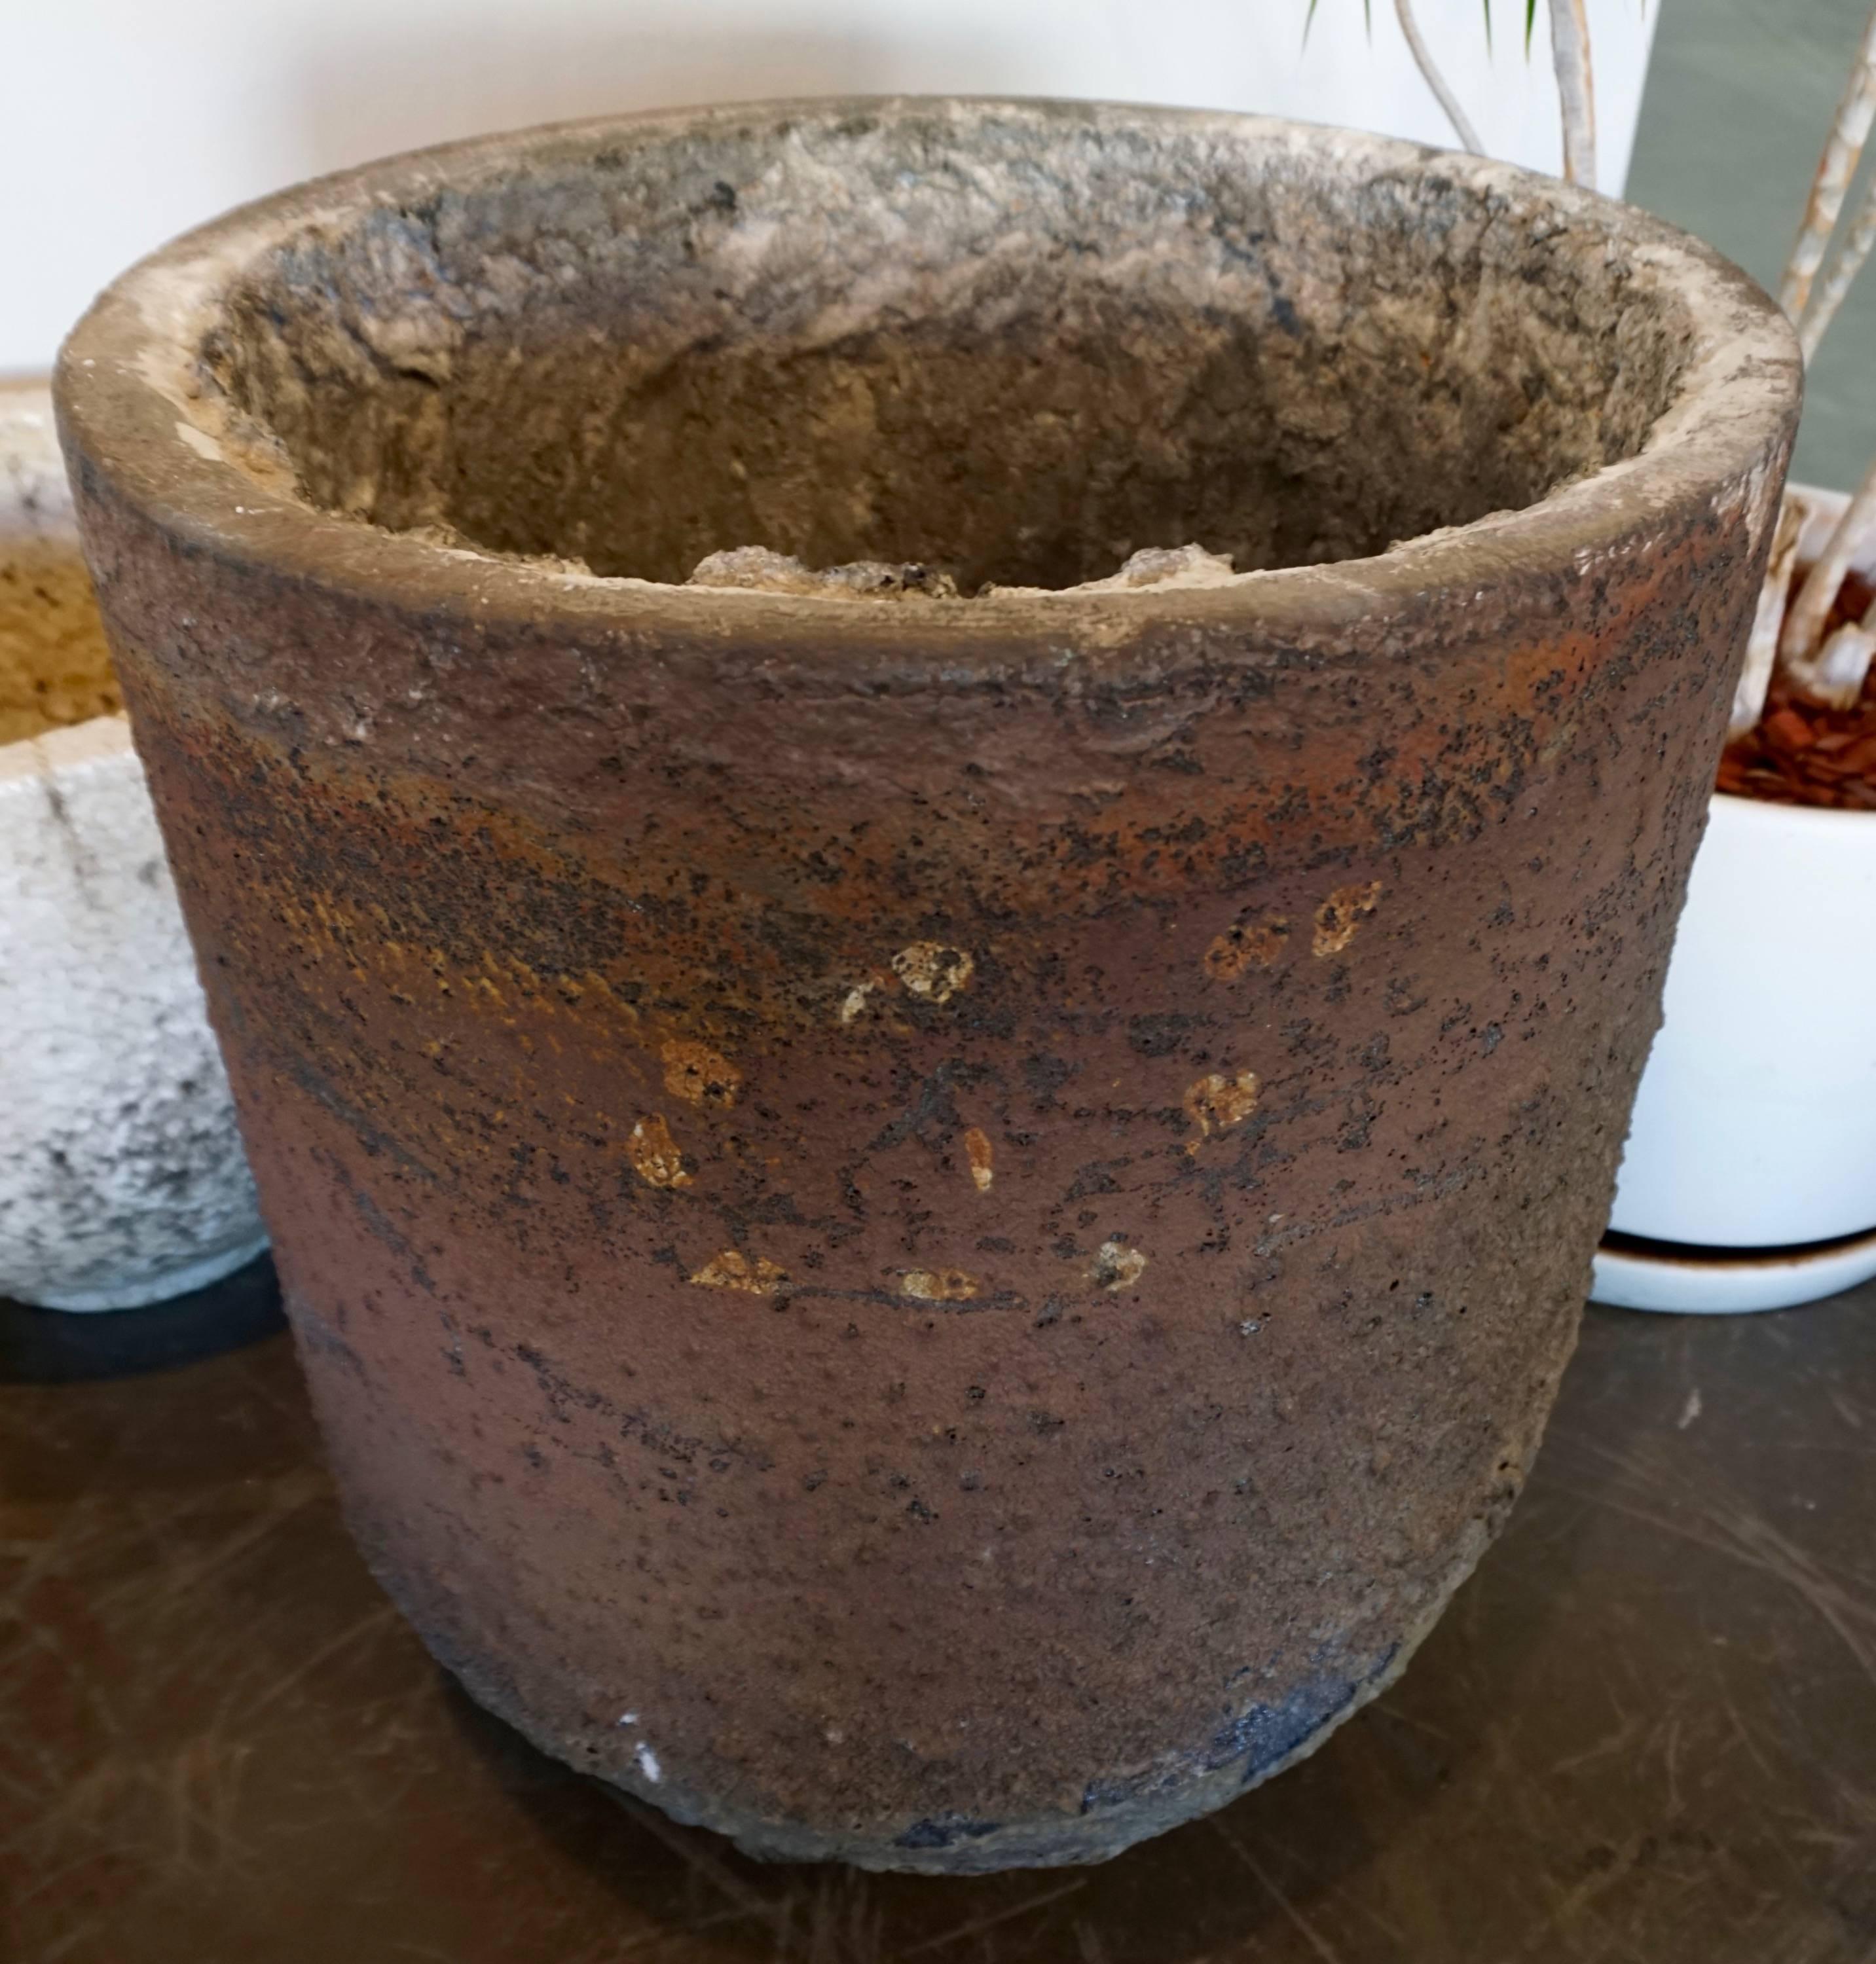 Large in scale and heavy. Used for melting iron ore at very high temperatures. Can be used as a planter or a decorative item, indoors or outside.
Nice patina.